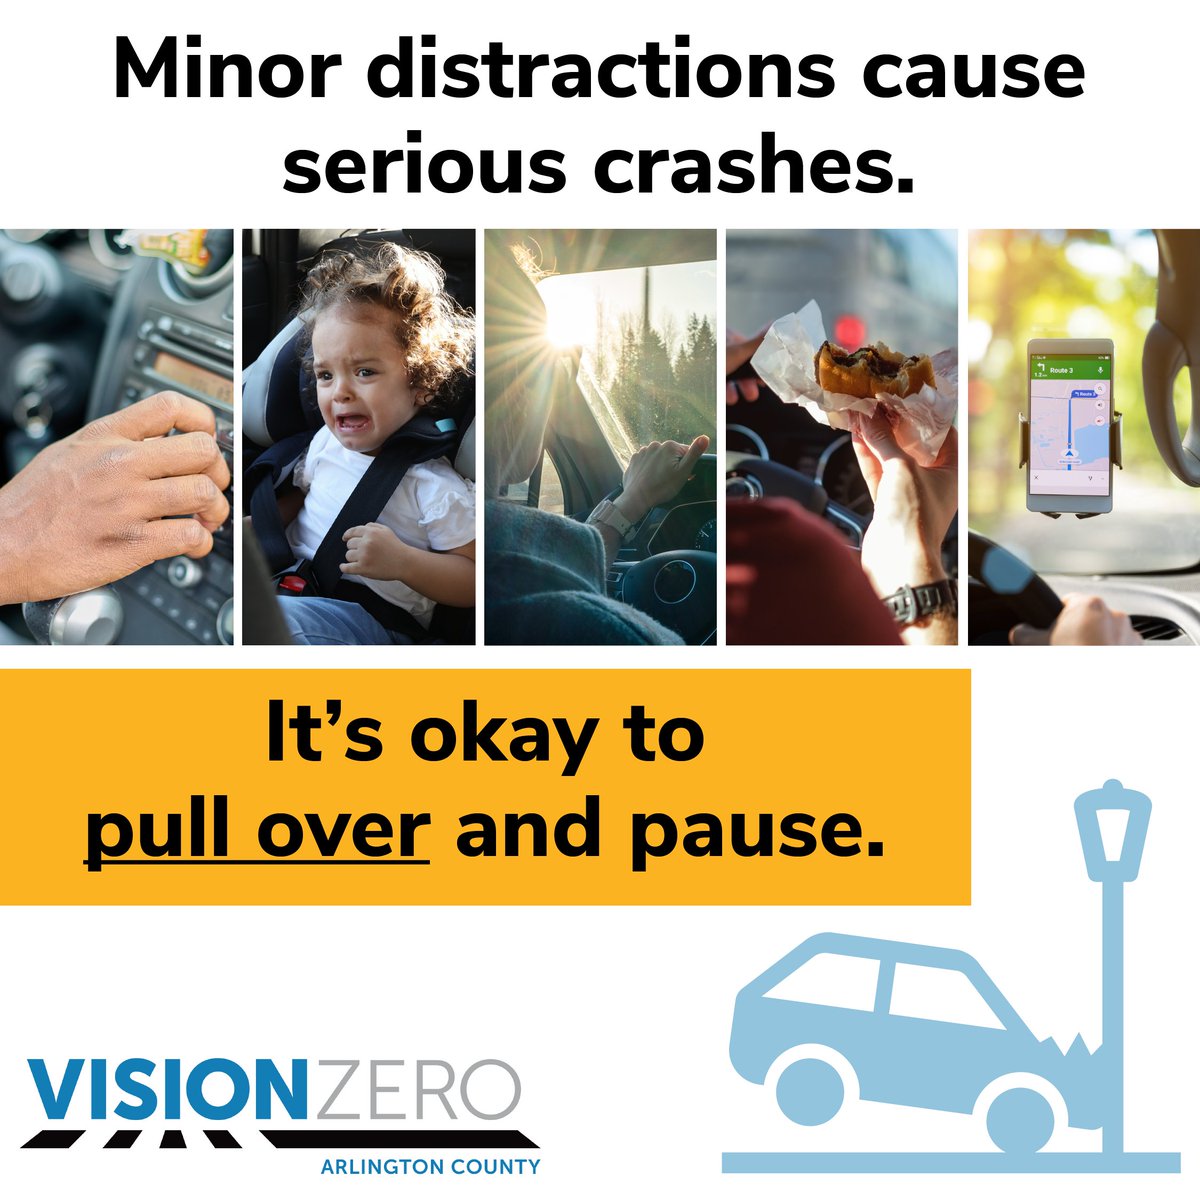 April is distracted driving awareness month. At least 1 in 5 crashes in Arlington is related to distraction. Phones, passengers, sun glare, eating & operating GPS have all led to severe crashes. Remember to pull over & reset rather than risk someone’s life ow.ly/56m250RcBLs